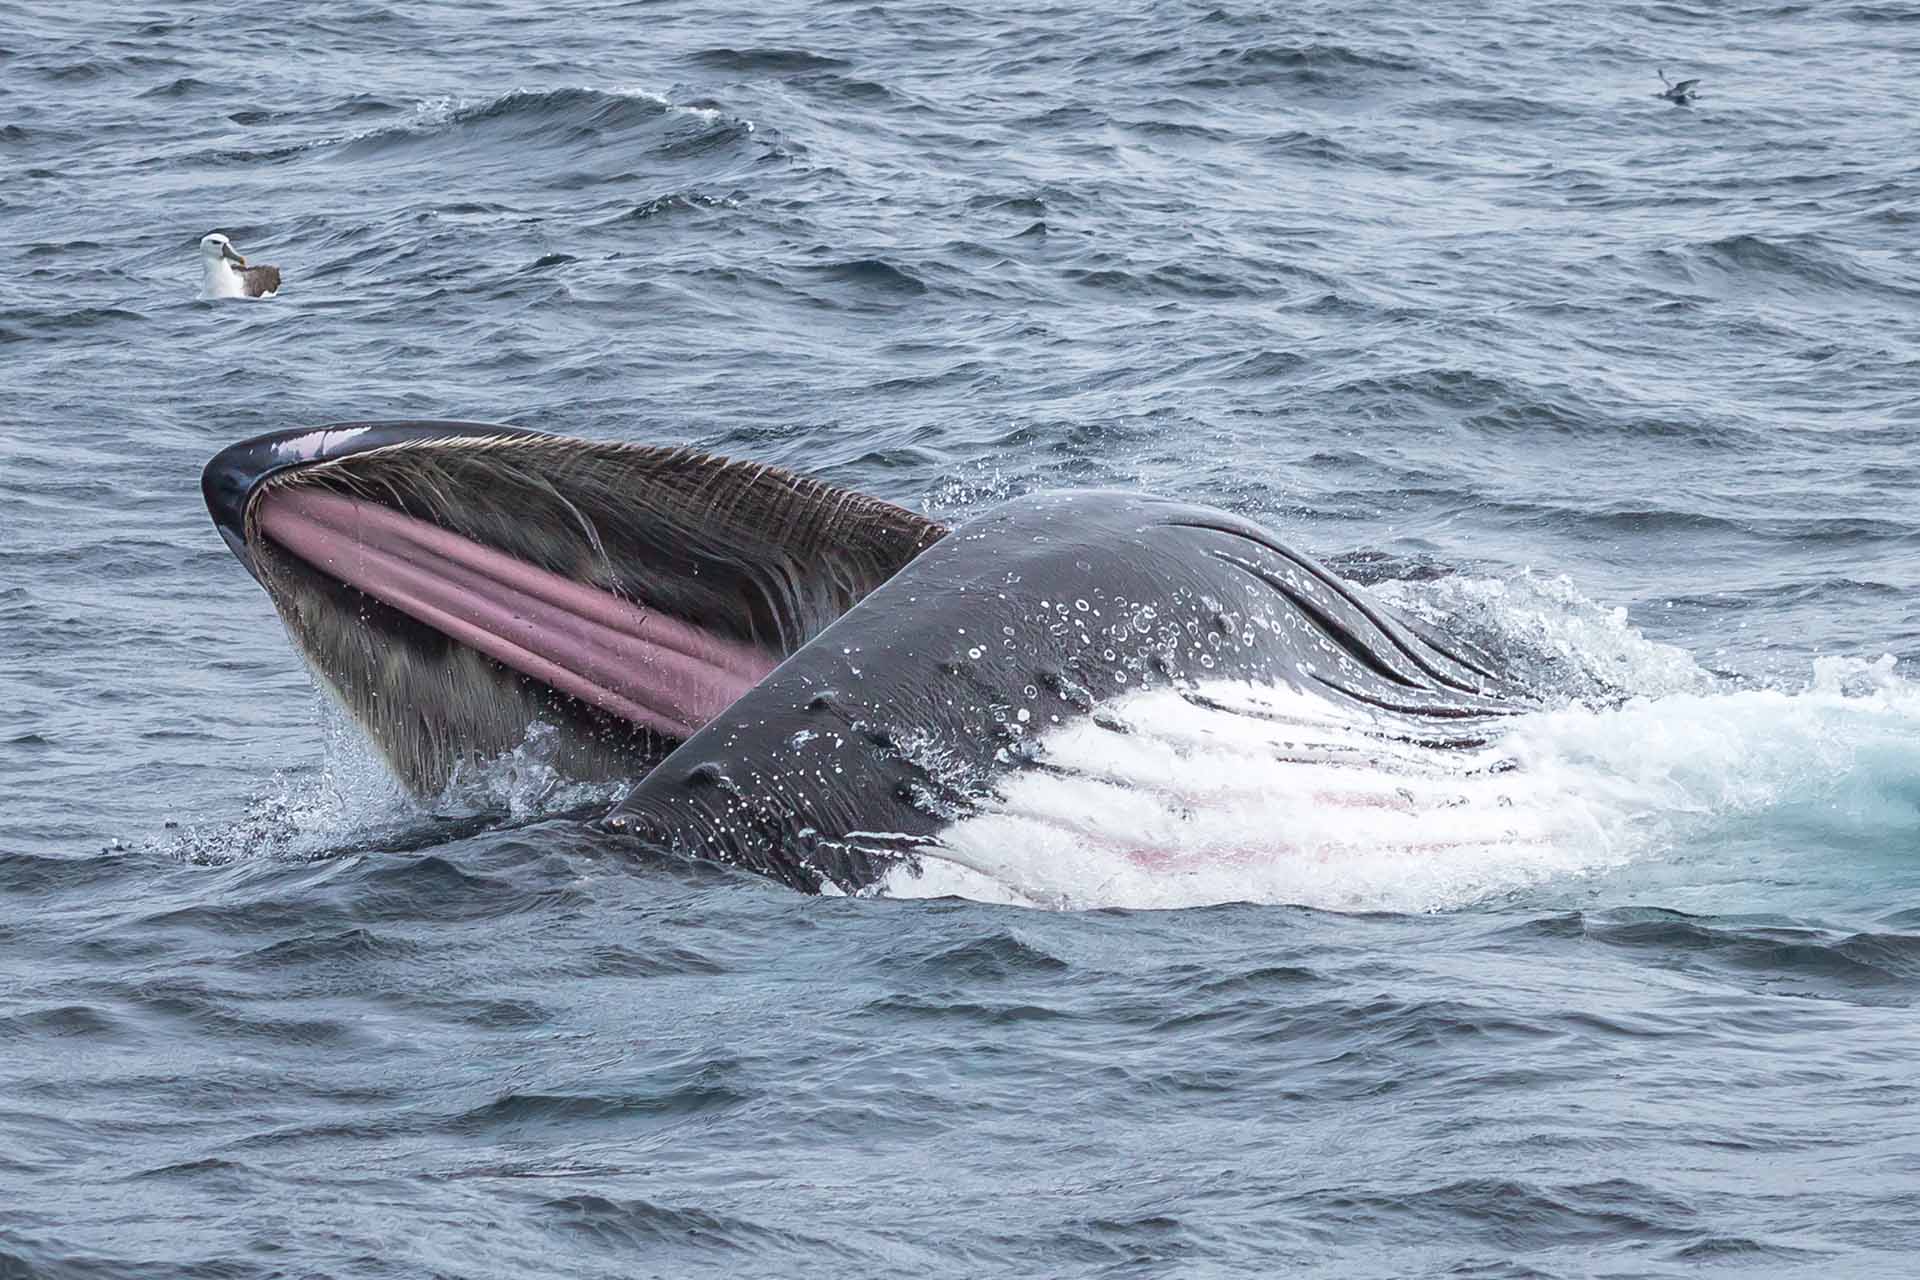 Whales, Humpback whales, whale watching, behaviour, moves, NSW, migration, south coast, feeding, lunge feeding, krill